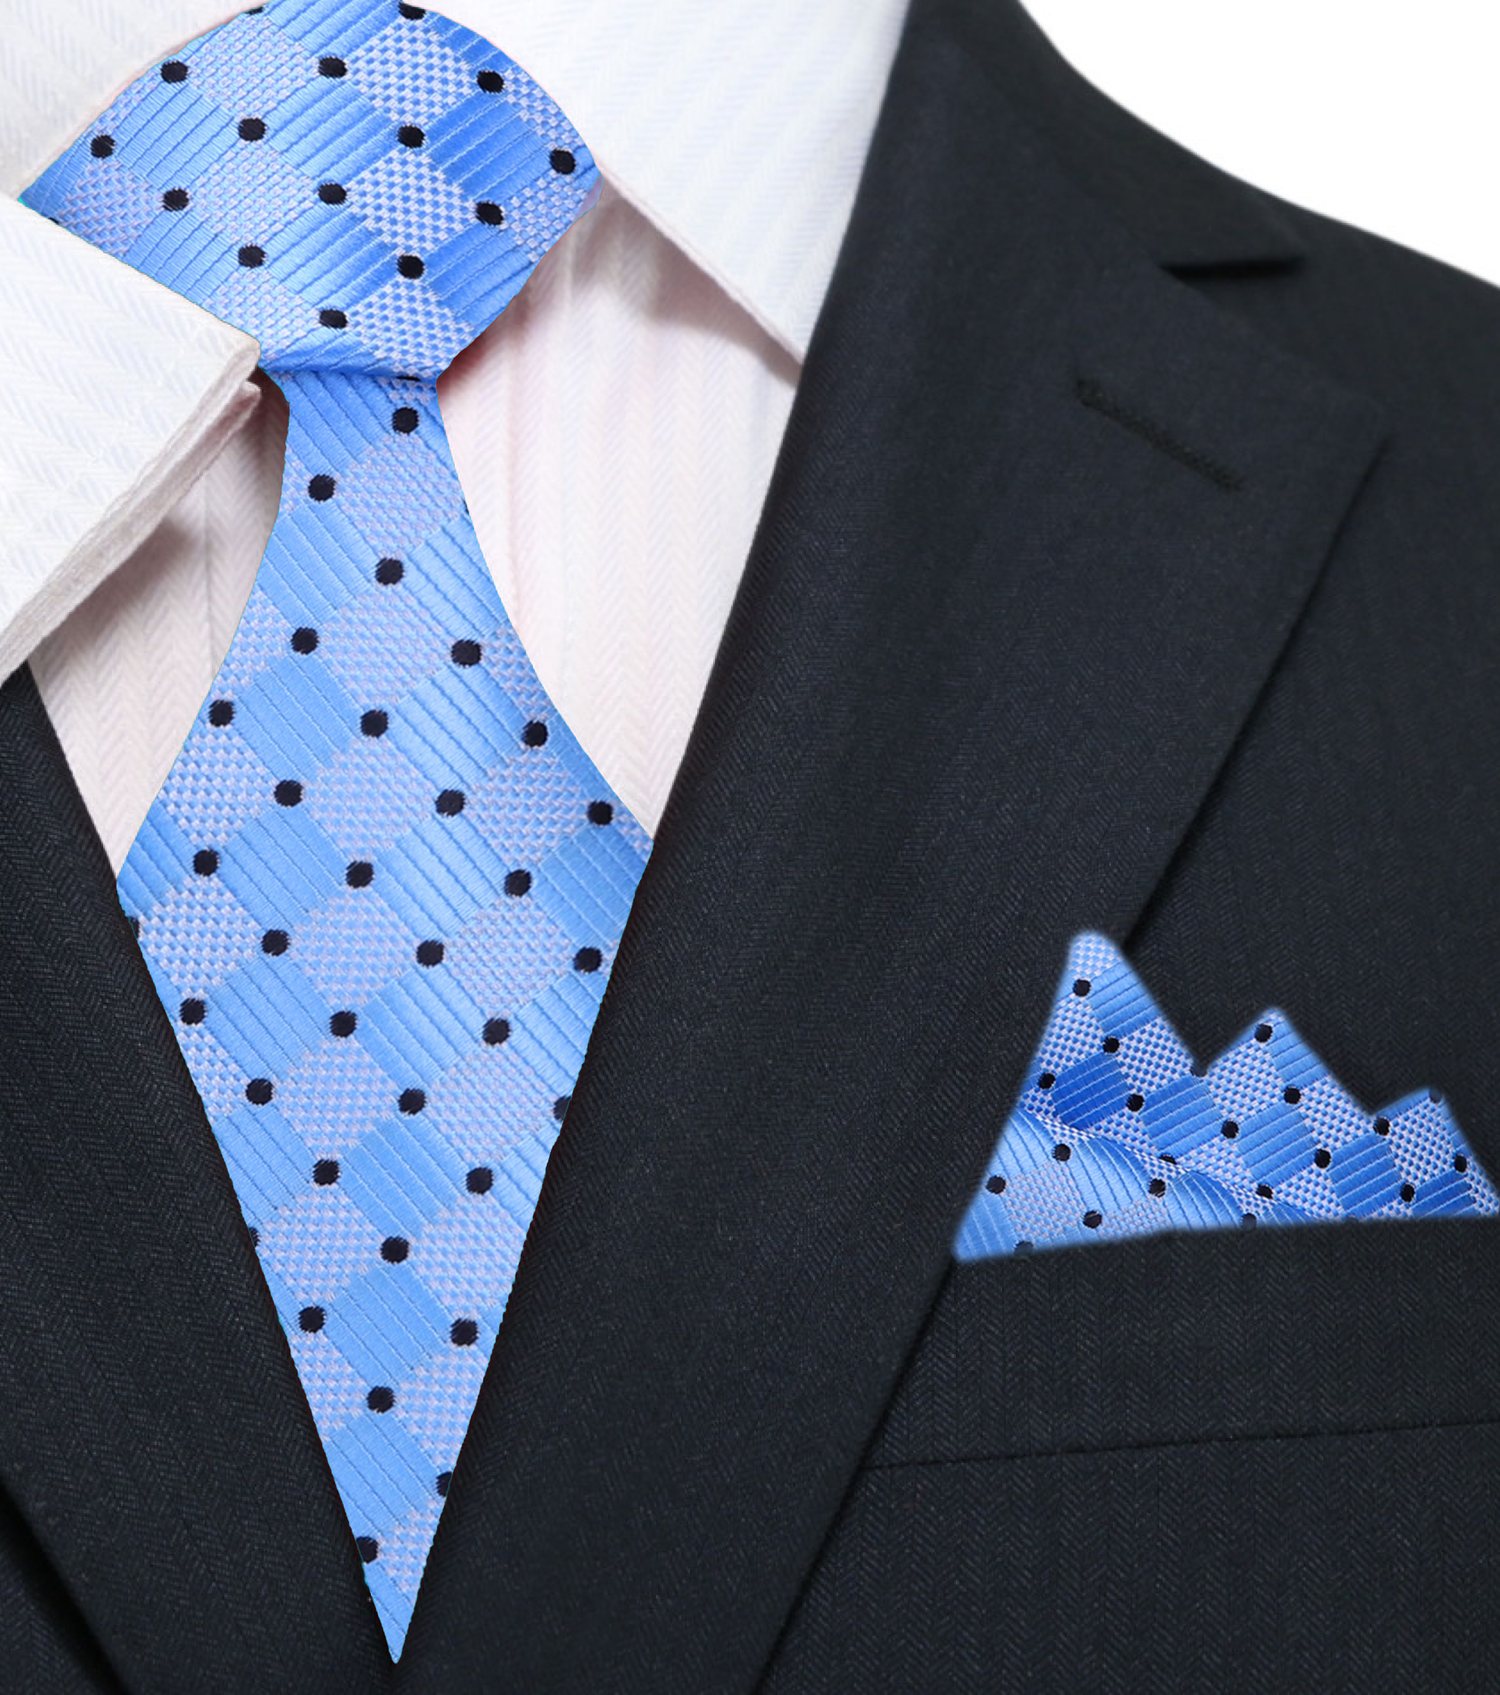 Main View: A Light Blue Geometric With Small Dots Pattern Silk Necktie With Matching Pocket Square||Light Blue, Black